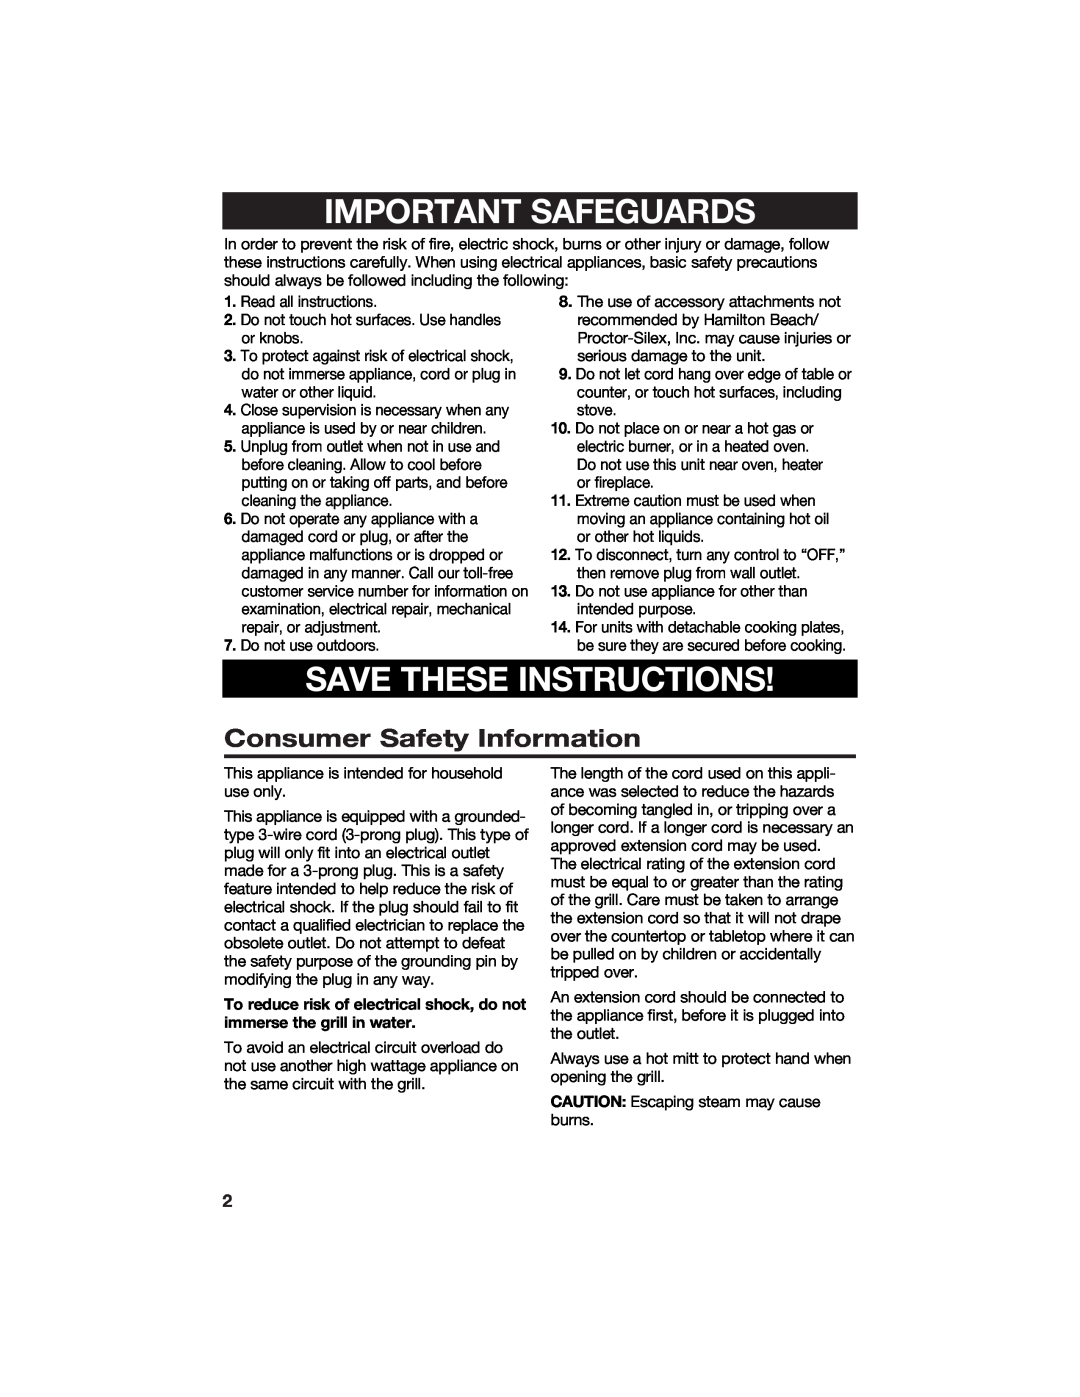 Hamilton Beach 840135600 manual Consumer Safety Information, Important Safeguards, Save These Instructions 